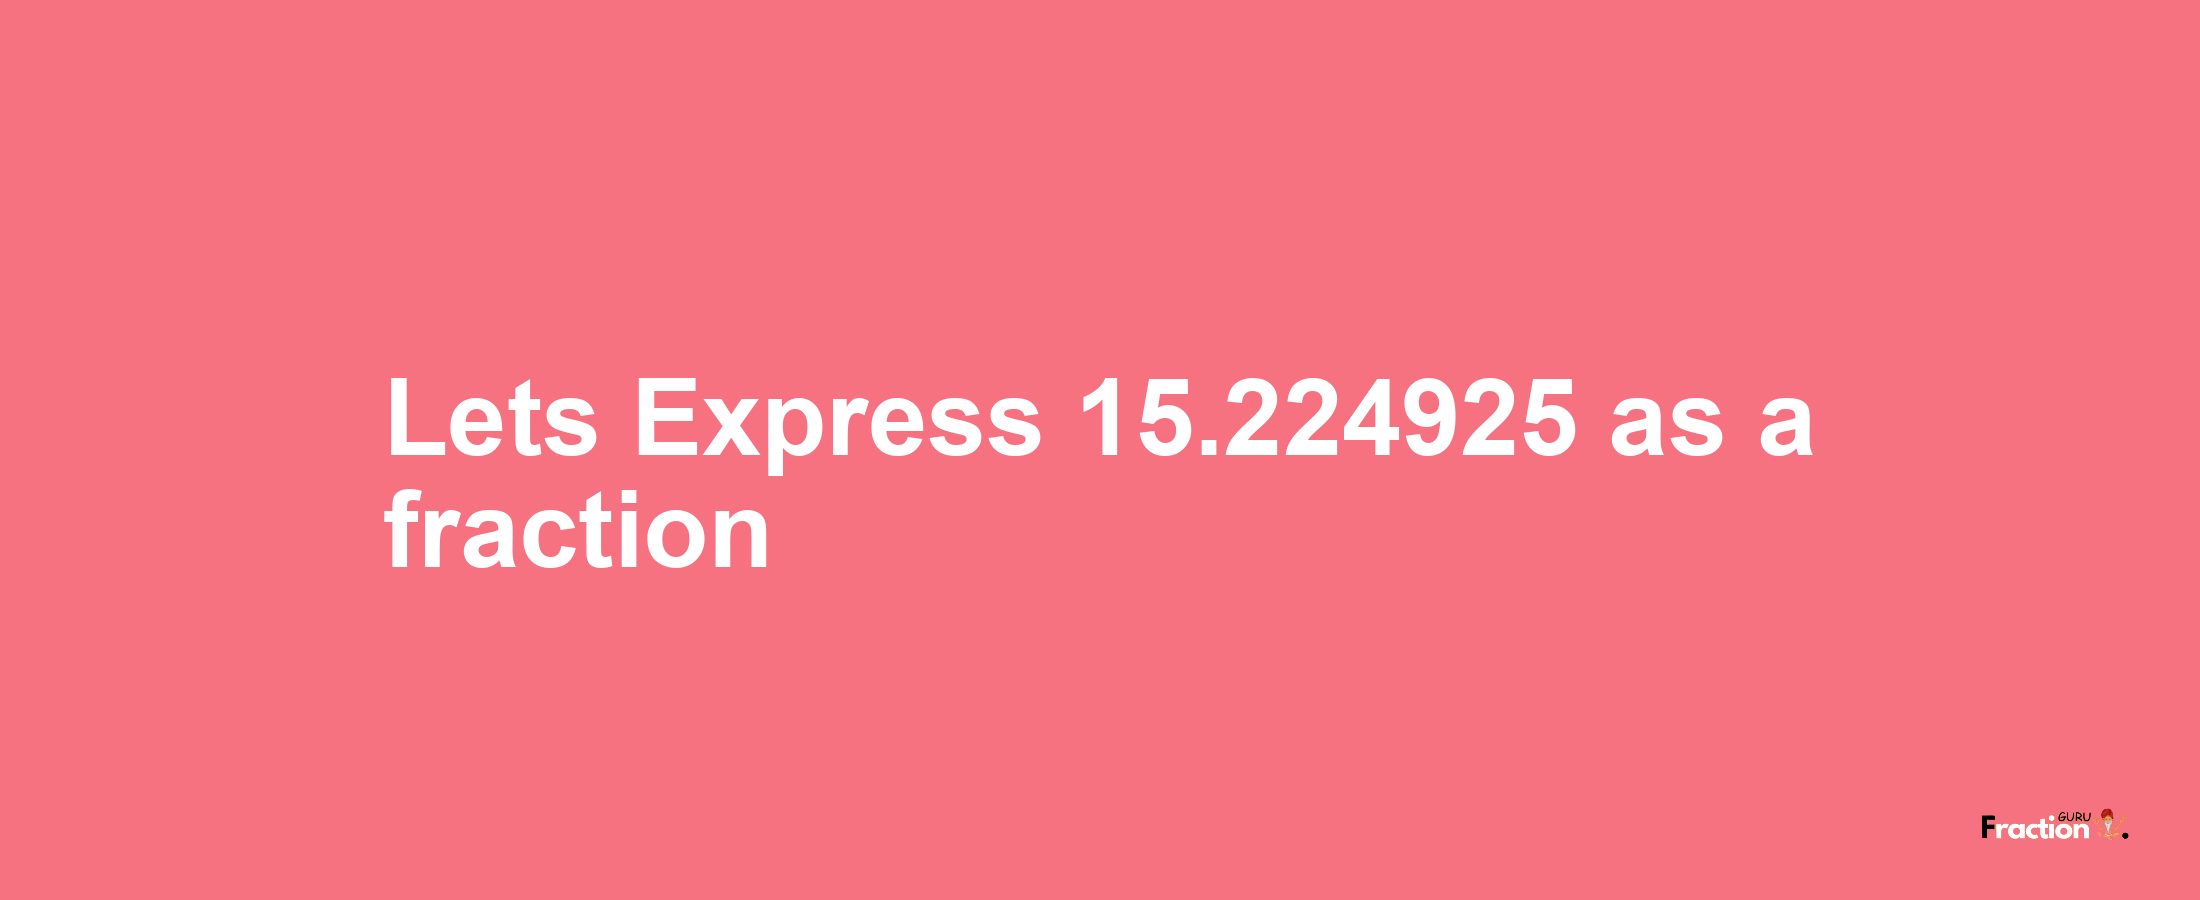 Lets Express 15.224925 as afraction